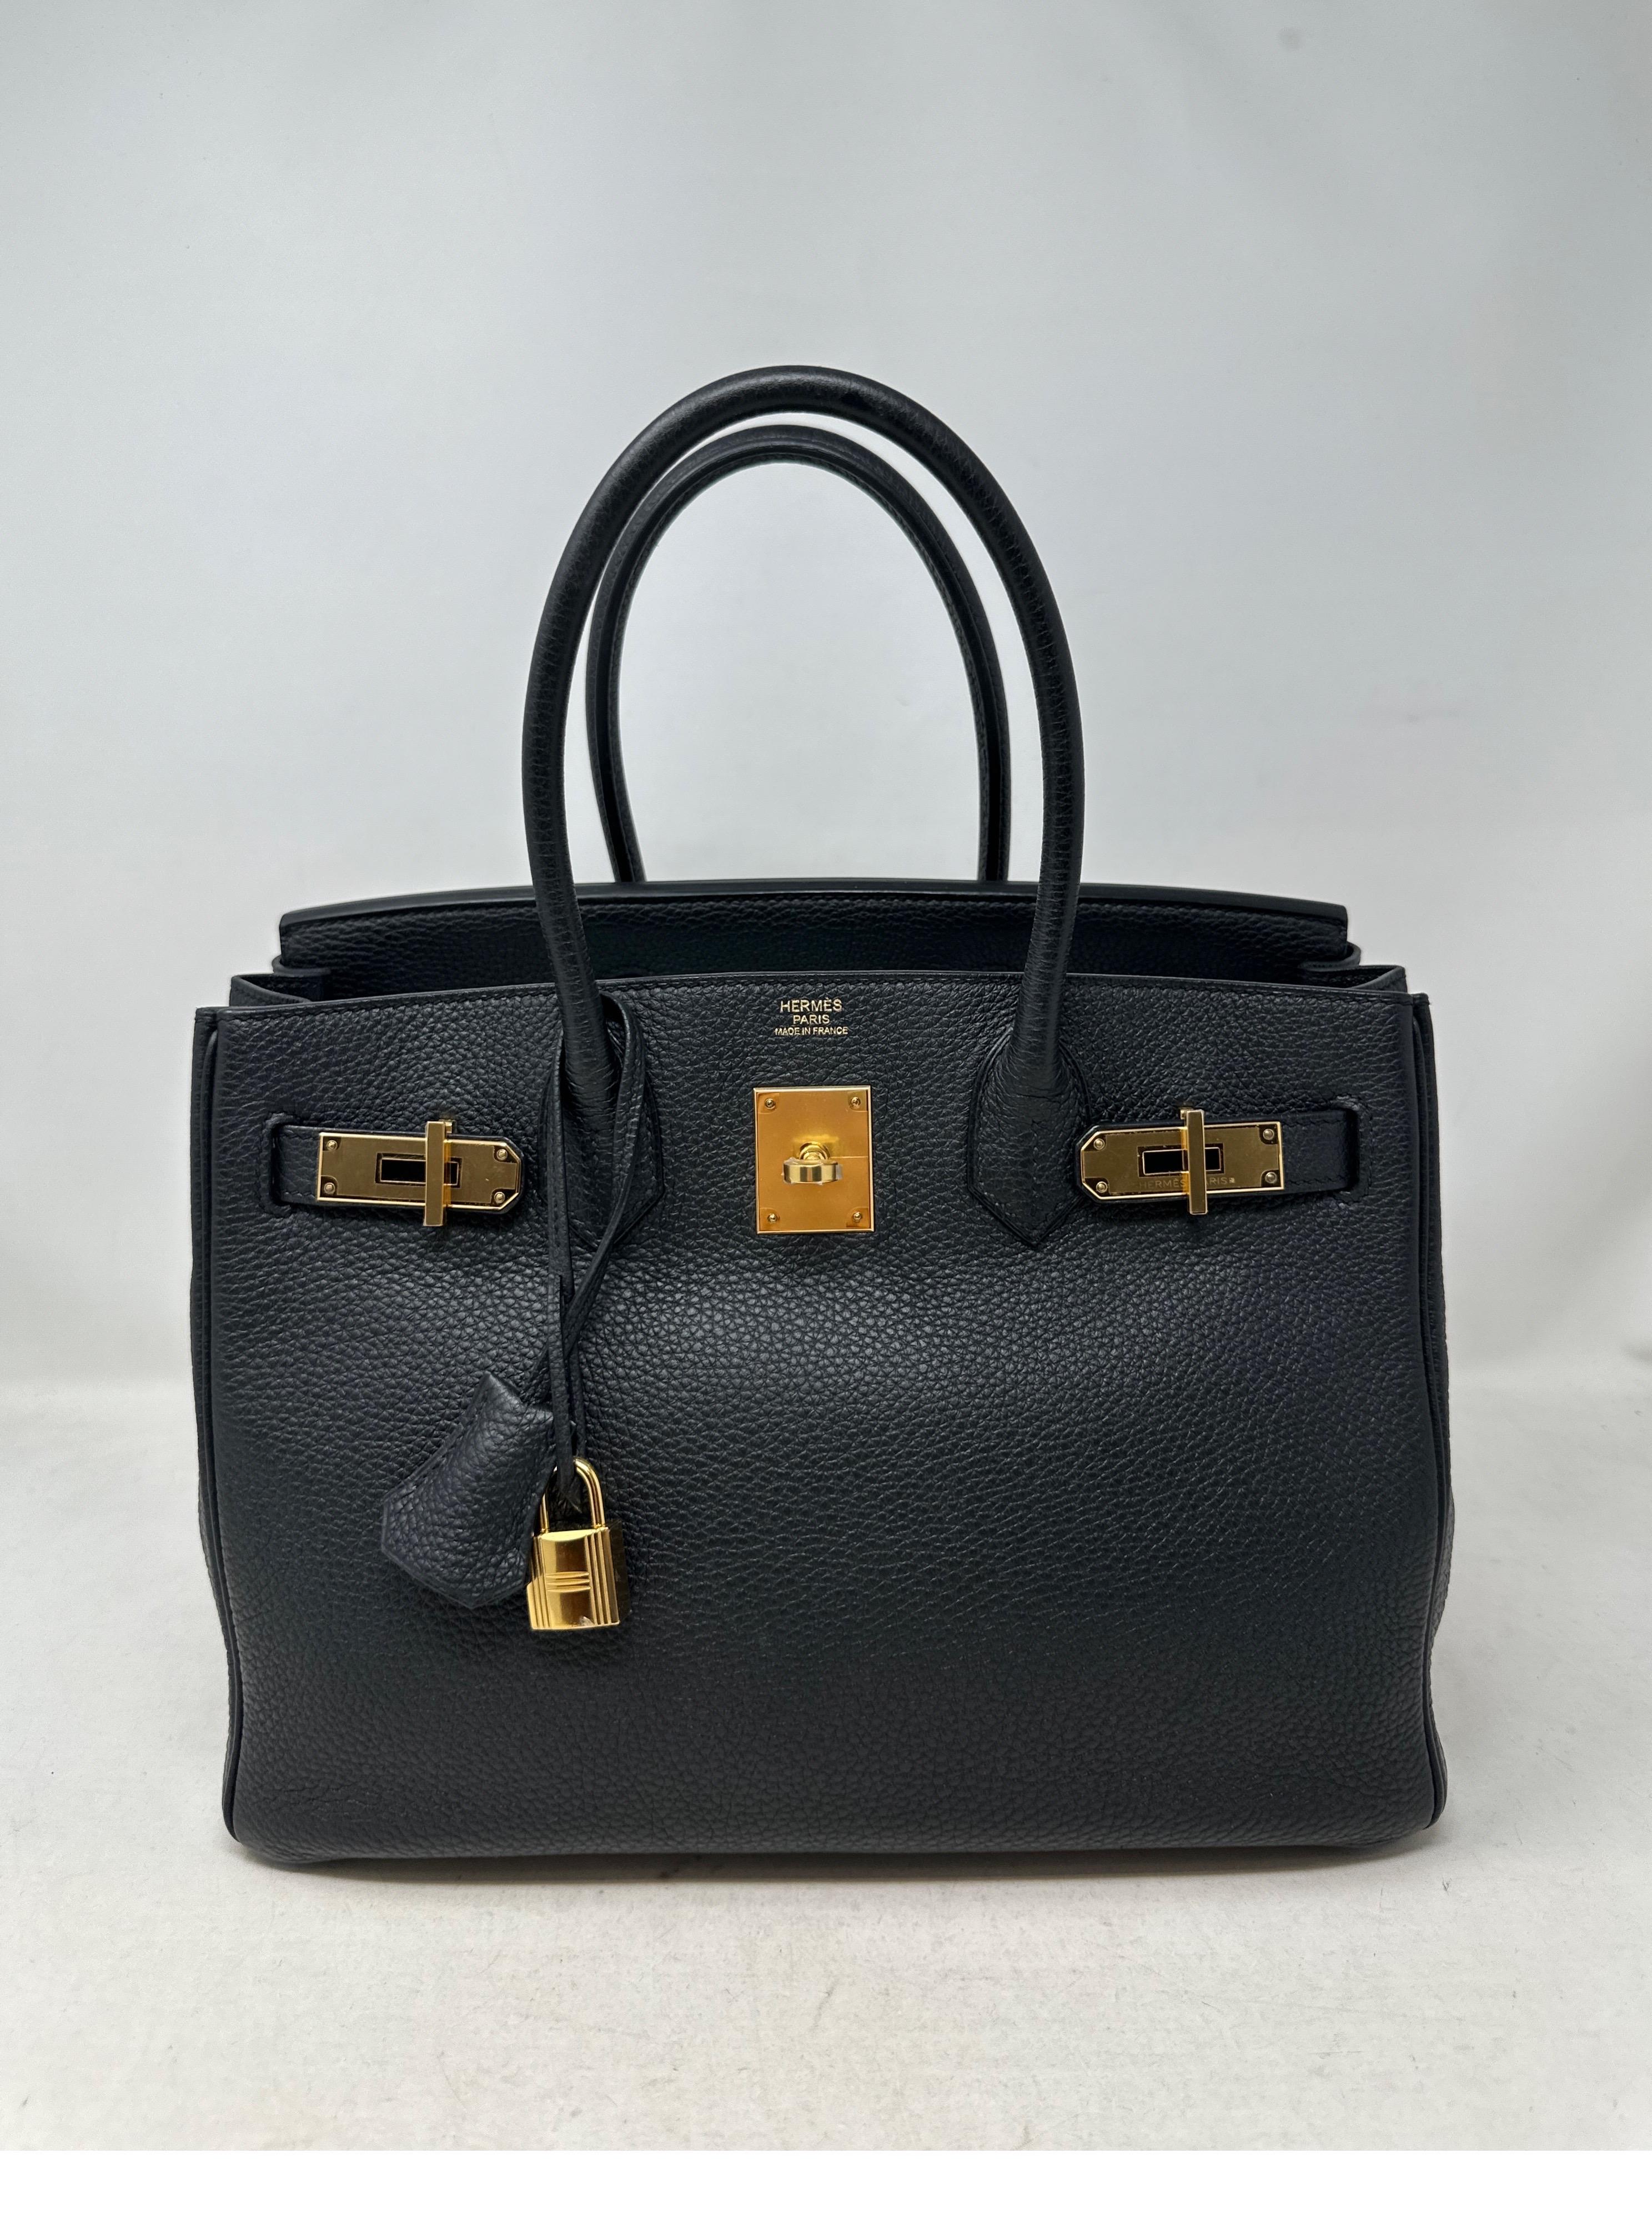 Hermes Black Birkin 30 Bag. Rose gold hardware. Togo leather. Excellent condition. Rare rose gold hardware. Interior clean. Includes clochette, lock, keys, and dust bag. Most wanted black color and size 30. Guaranteed authentic. 